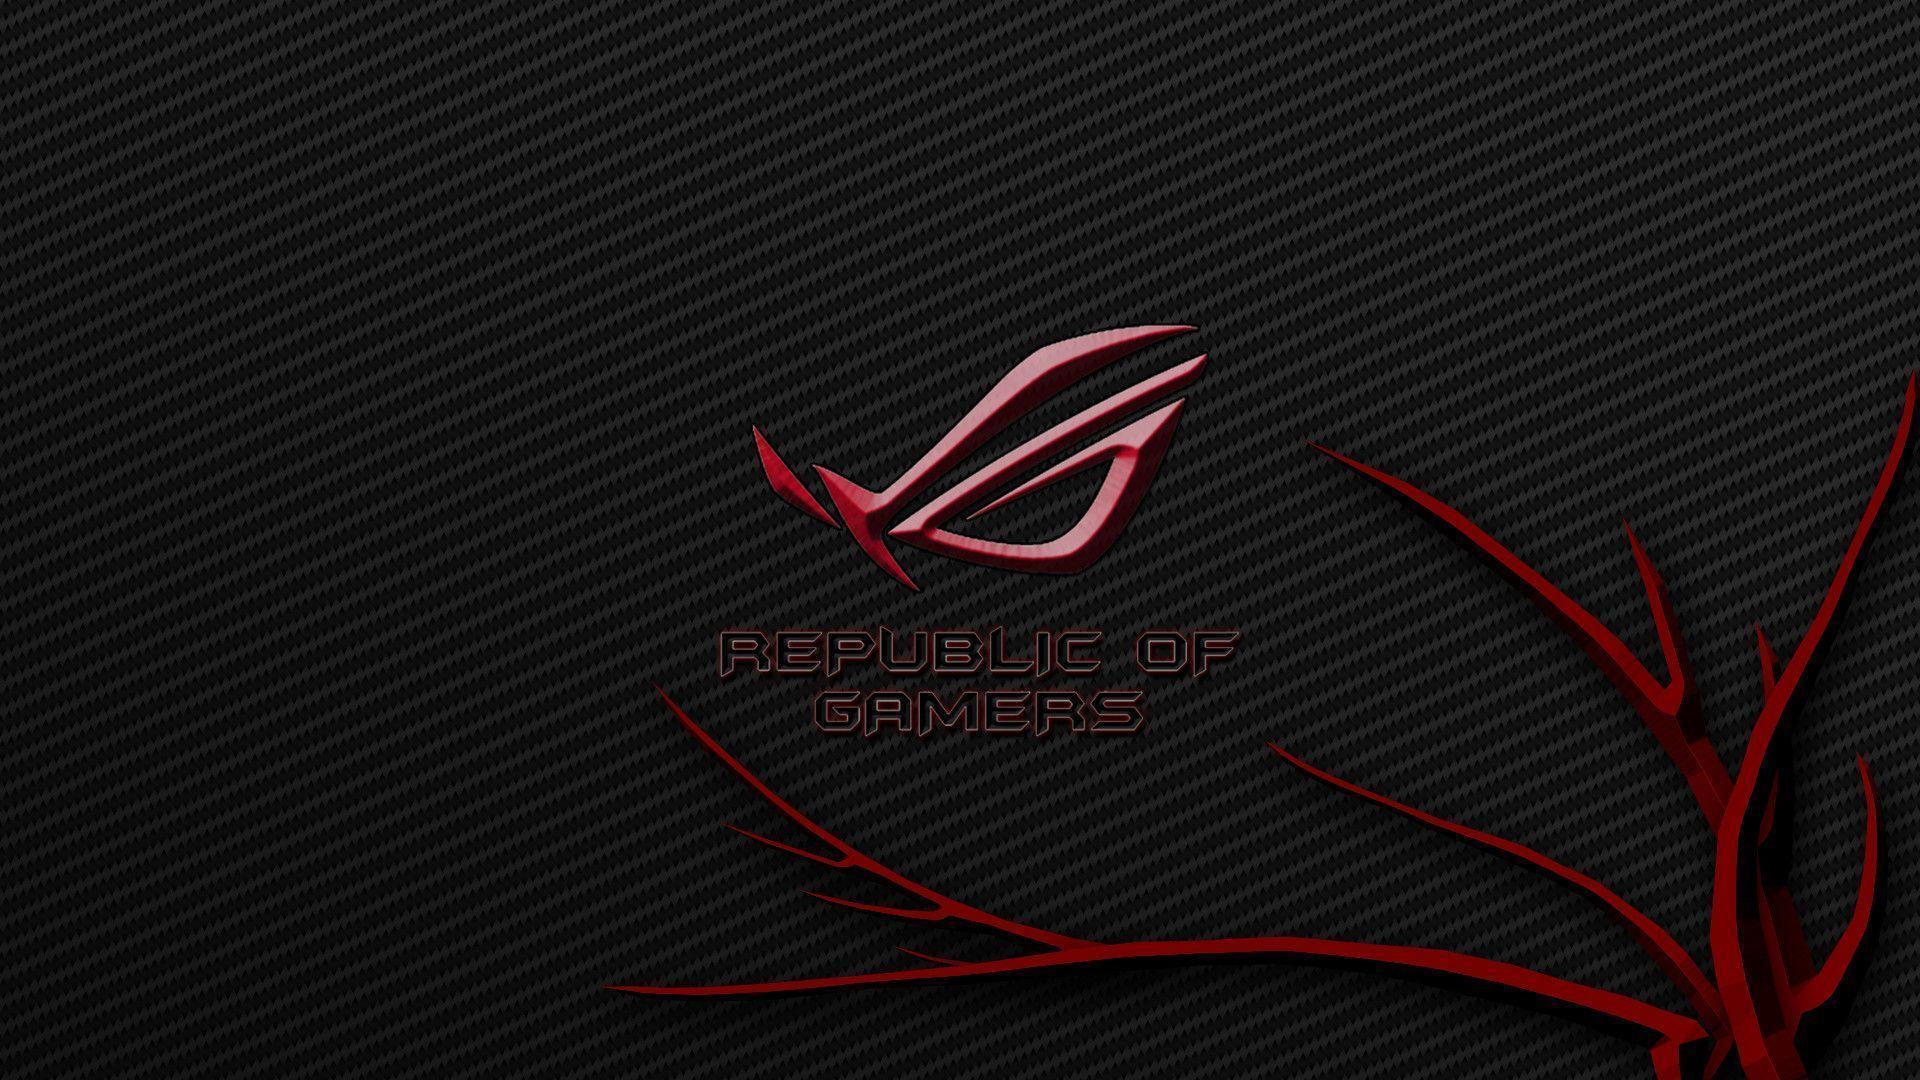 Republic Of Gamers Wallpaper Background. Hdwidescreens